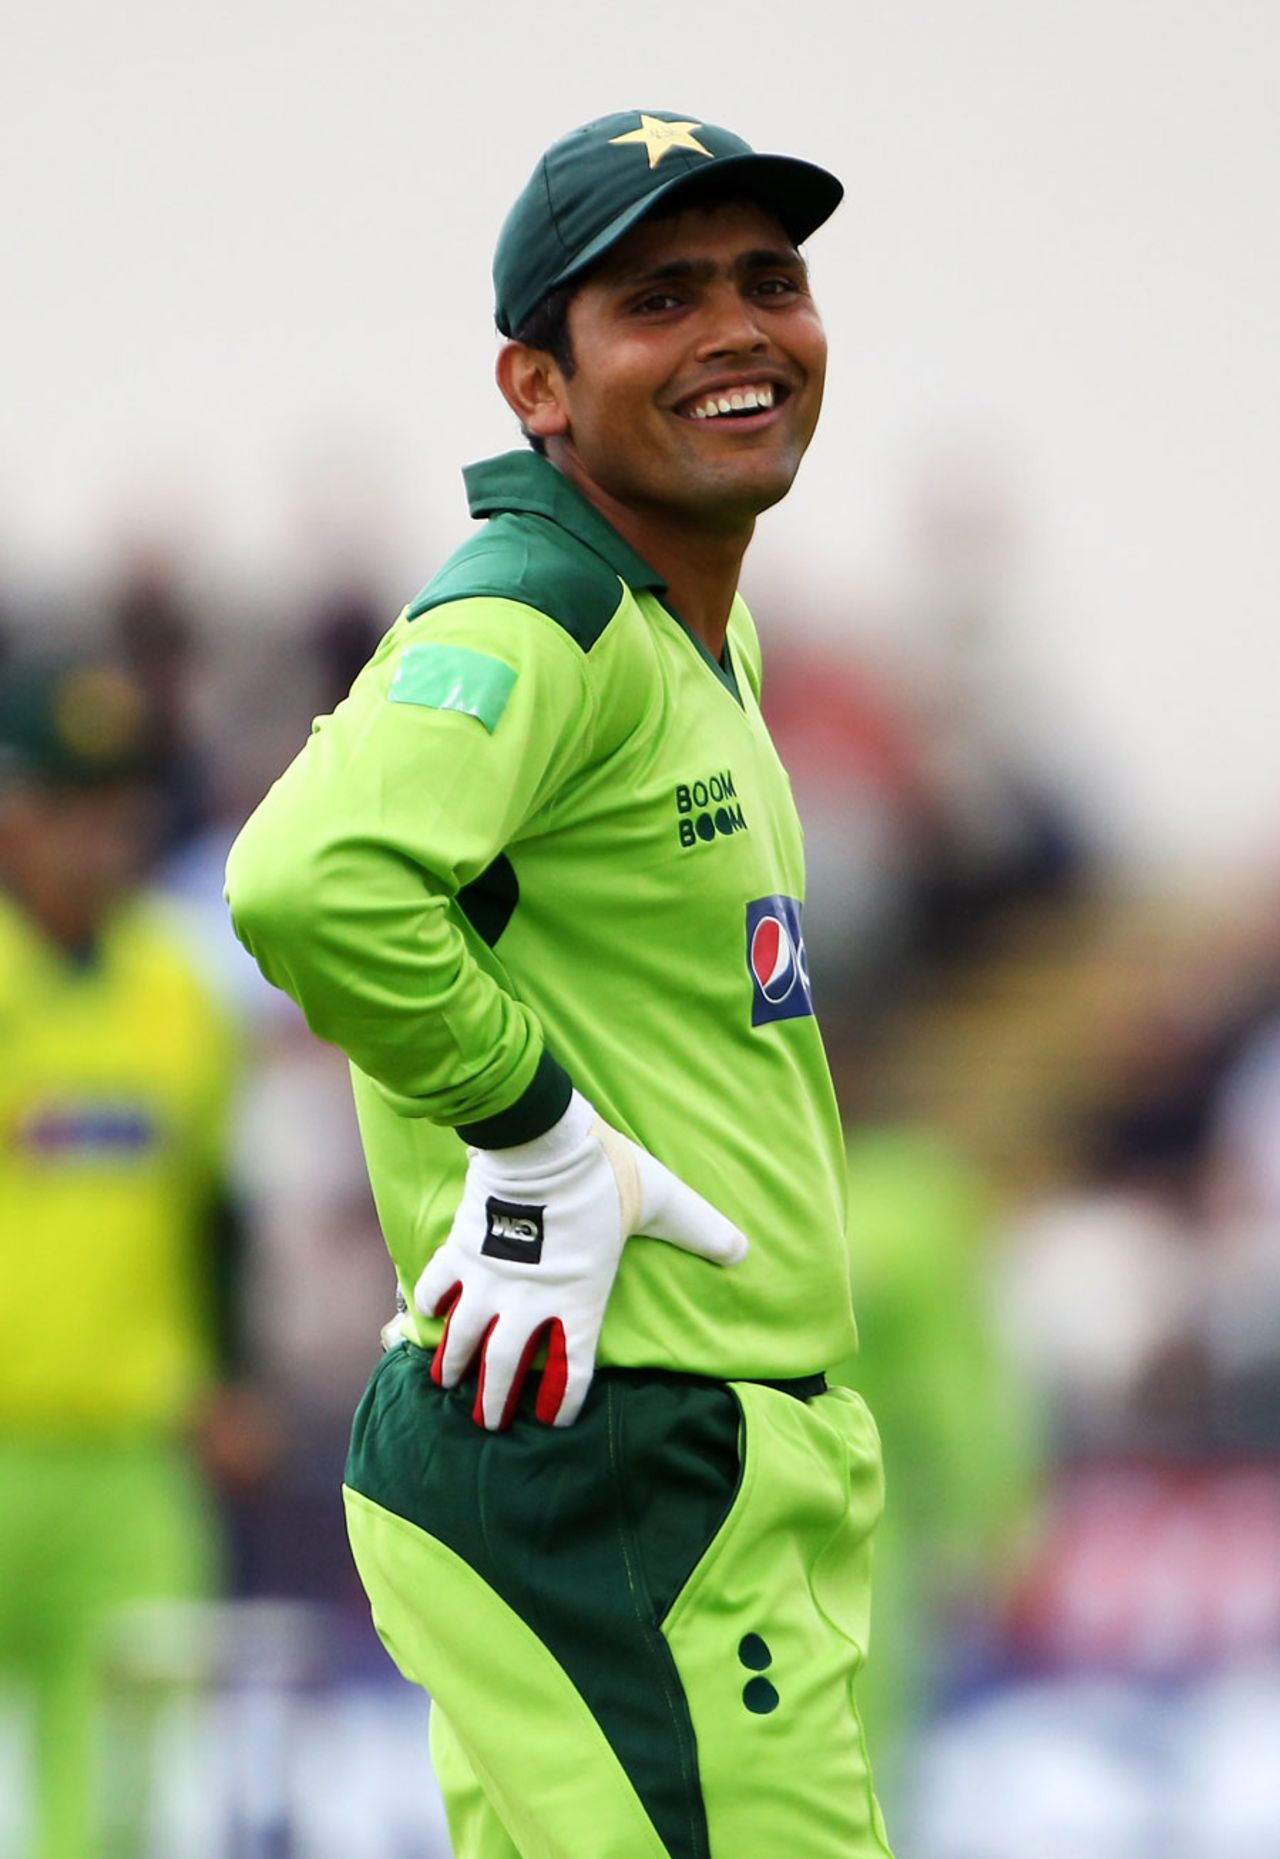 Kamran Akmal is under scrutiny off the field, but was in good spirits nonetheless, England v Pakistan, 1st ODI, Chester-le-Street, September 10 2010 